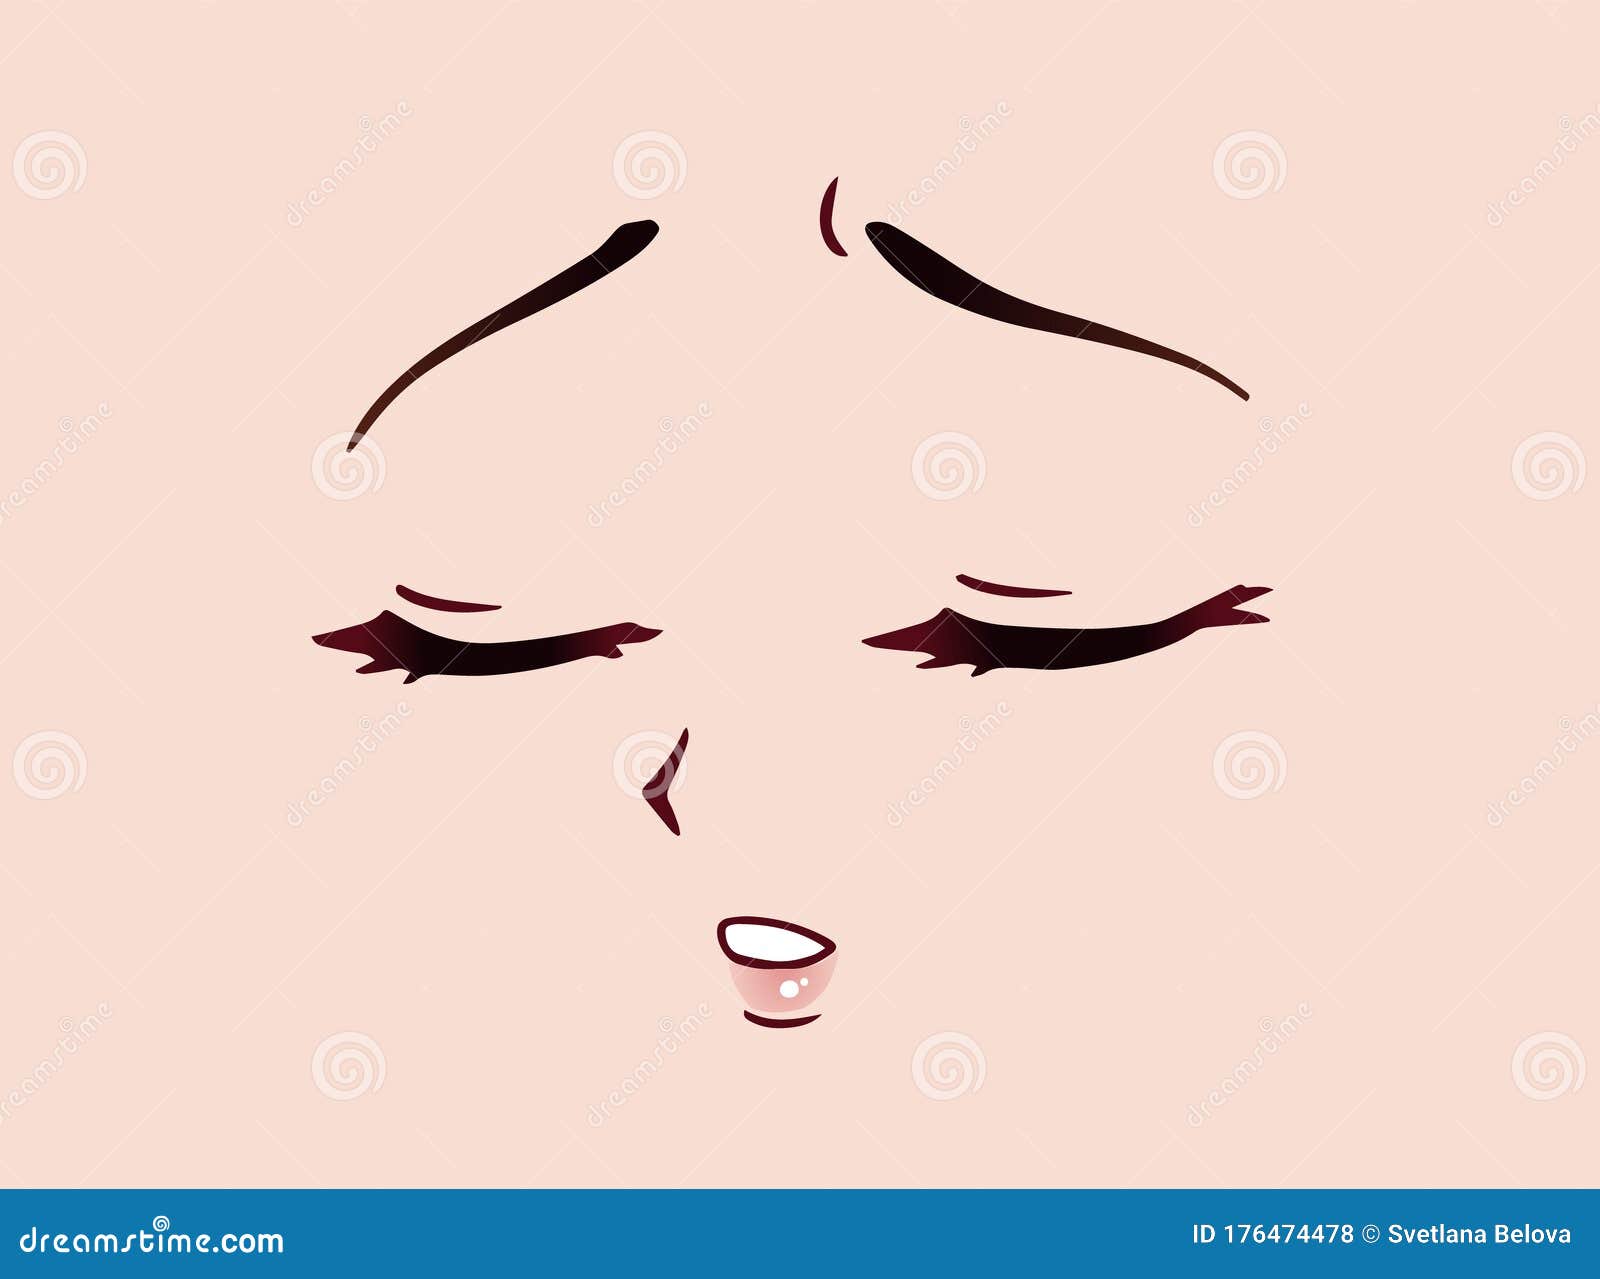 Sad Mouth Drawing Stock Illustrations 2 972 Sad Mouth Drawing Stock Illustrations Vectors Clipart Dreamstime How to draw a sad face, sad anime face, step by step. dreamstime com